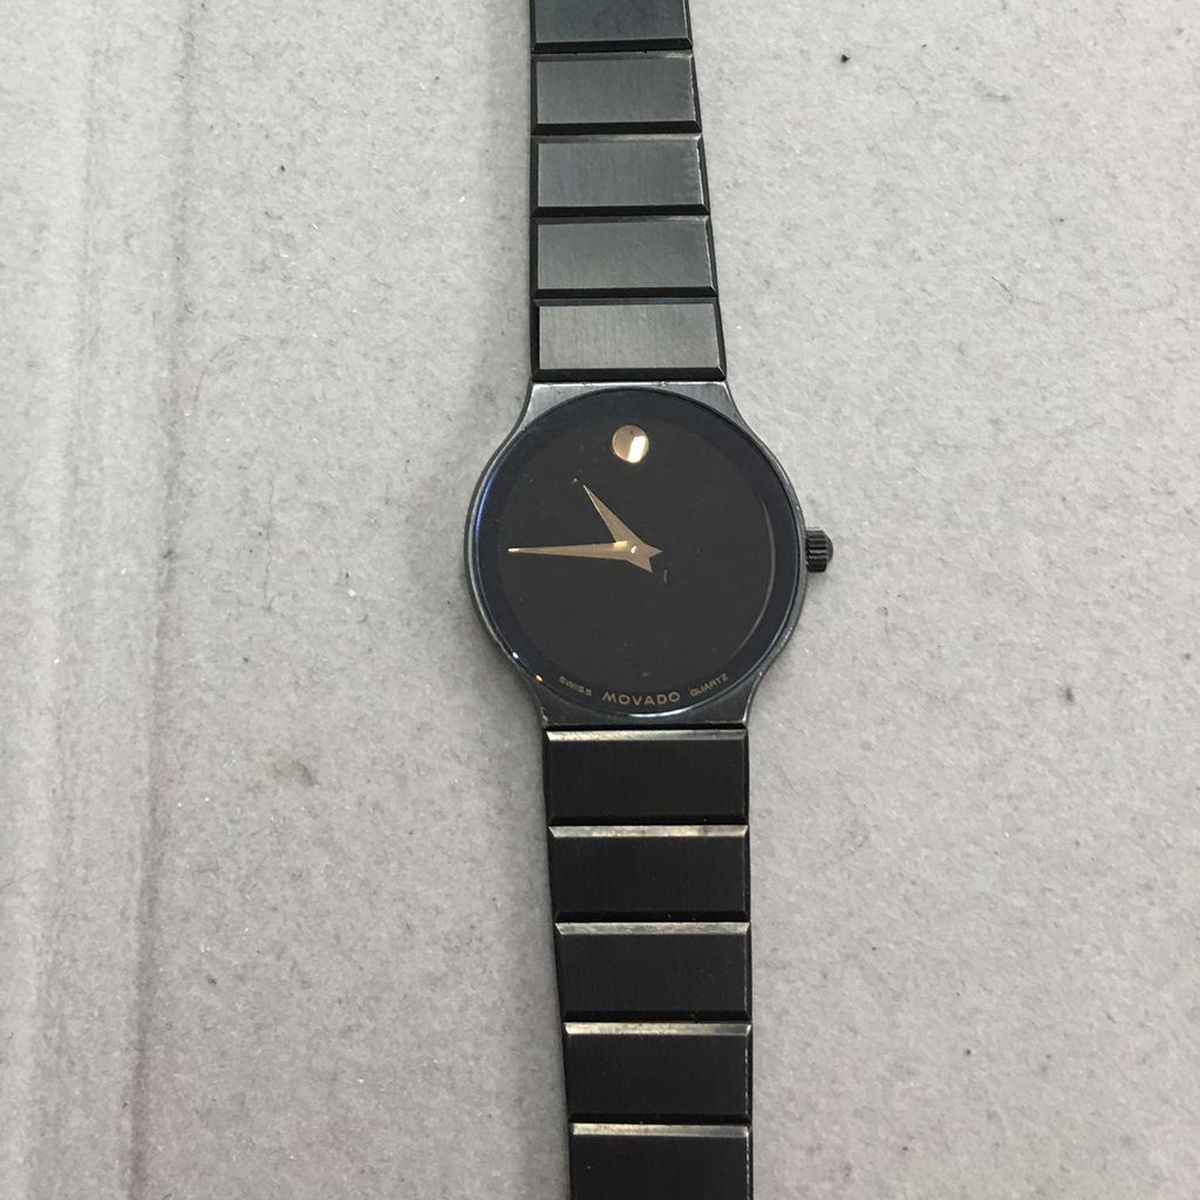 The Best Movado Watch for Men and Women